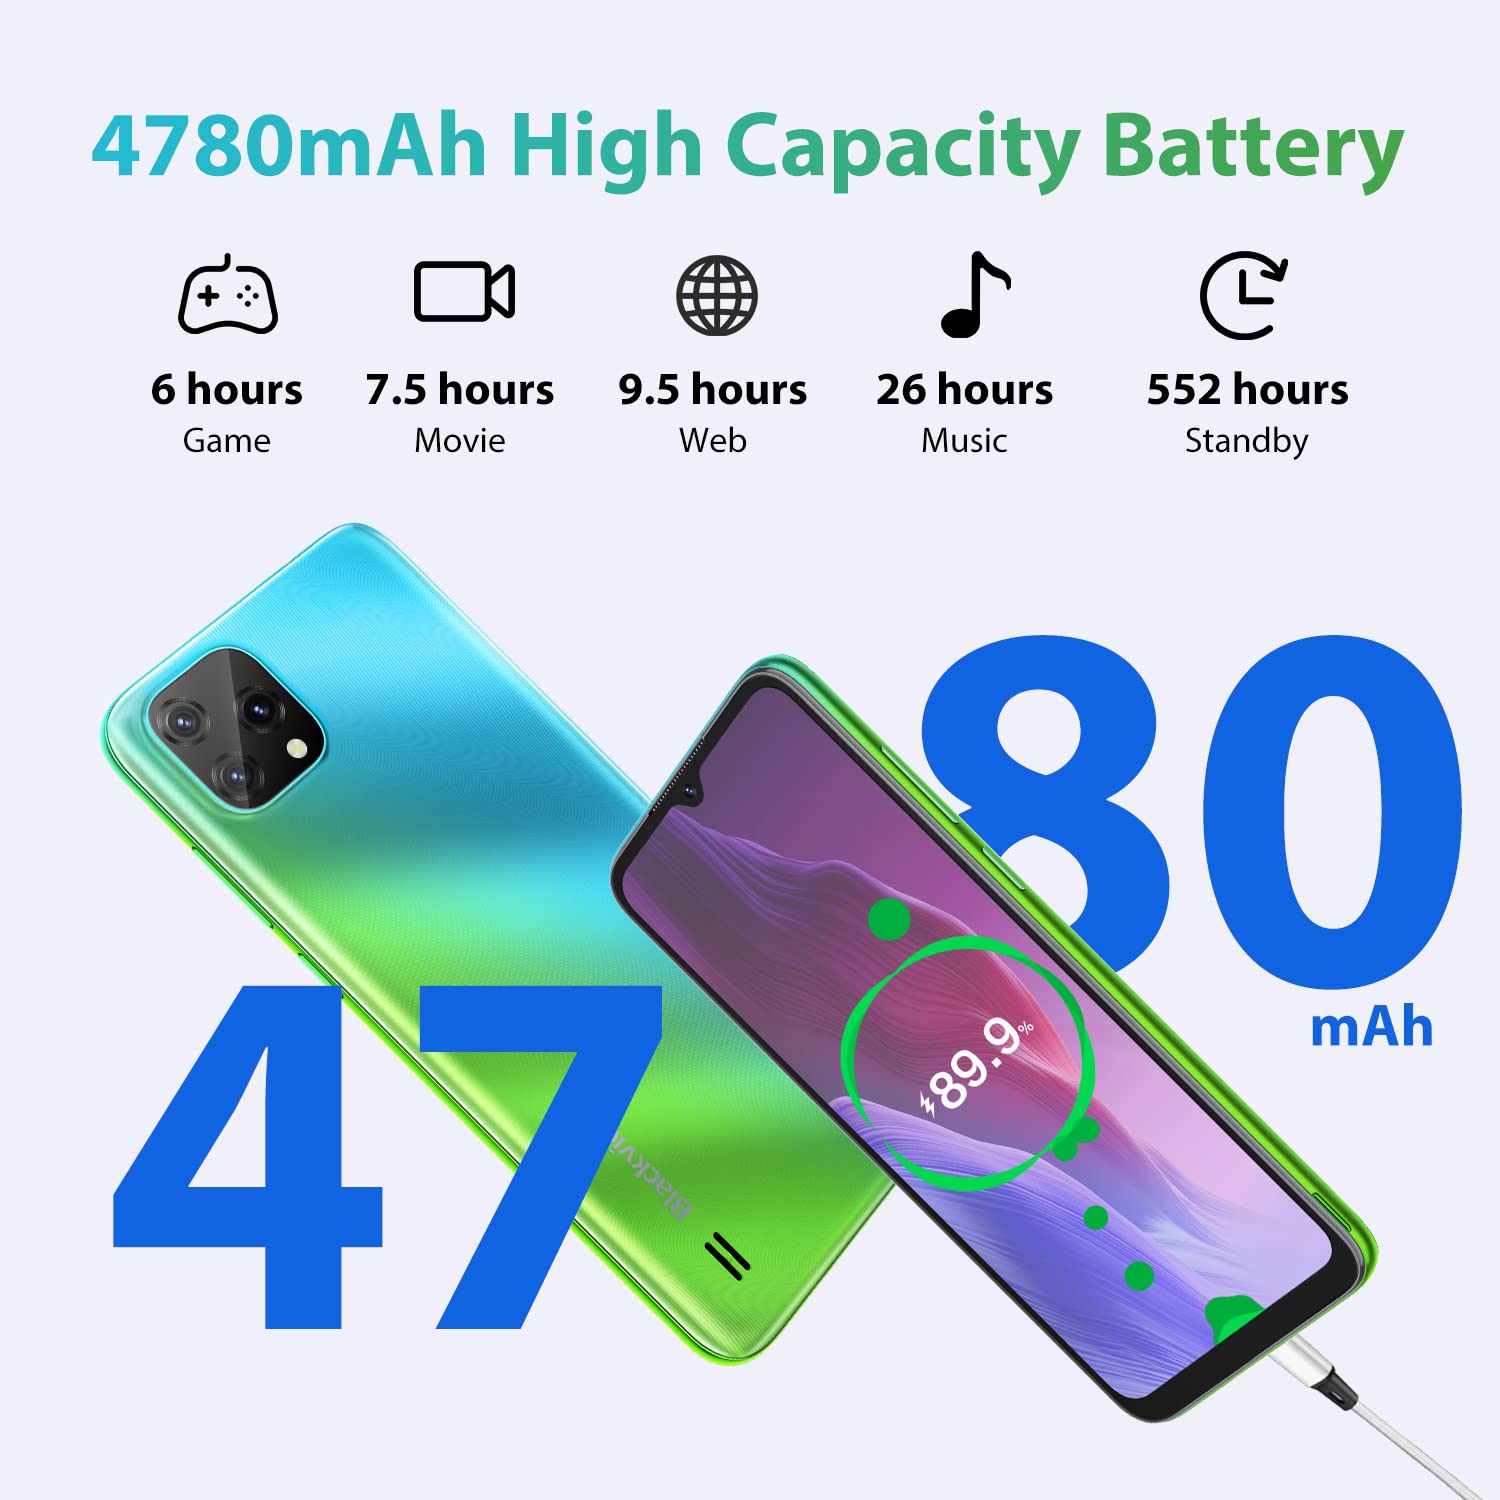 Unlocked Smartphones,Blackview A55, 2022 Unlocked Cell Phones Android 11, 6.528'' HD+,3GB RAM 16GB ROM,4780mAh High Capacity Battery,3-Card Slots,4G Dual SIM,Wi-Fi,8MP+5MP,Face ID,T-Mobile Phone,Black